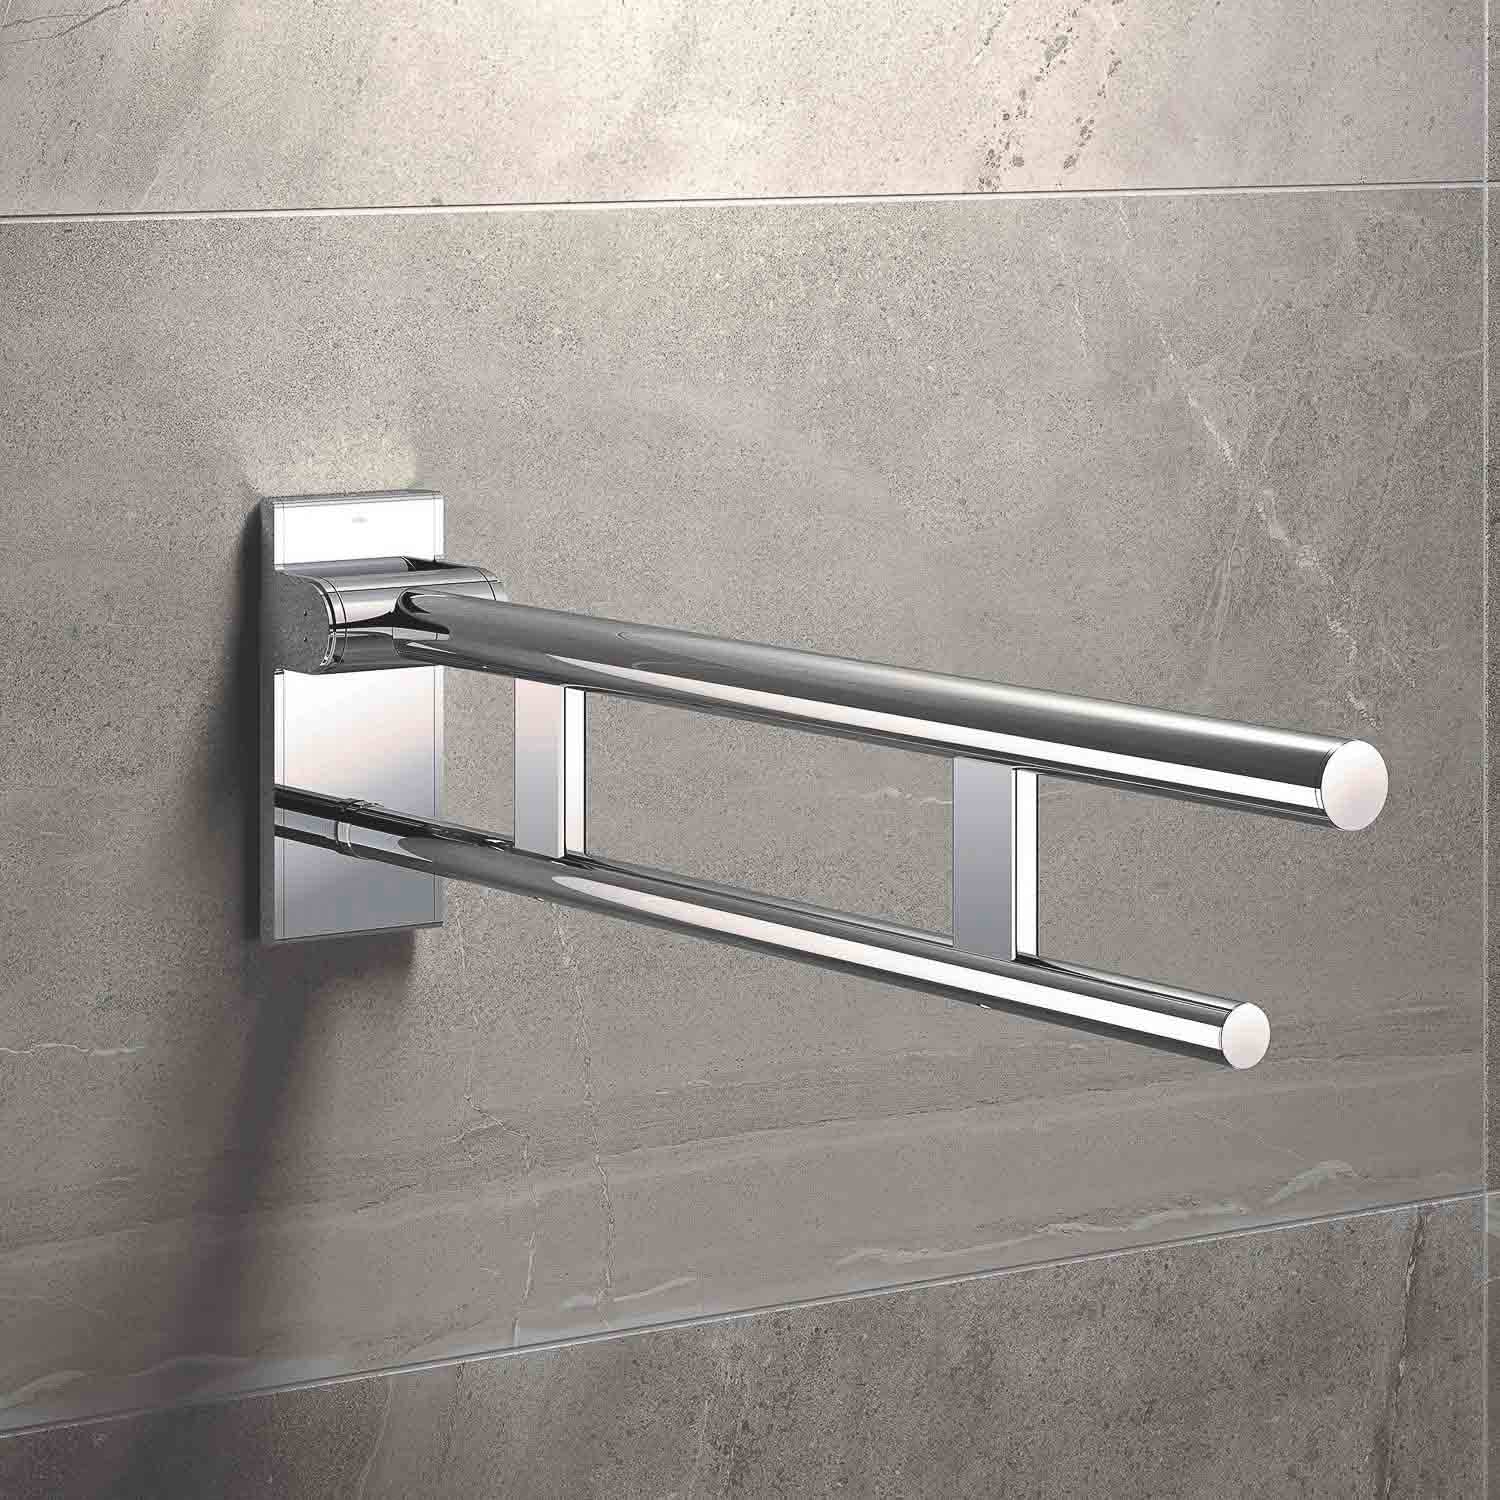 850mm Freestyle Hinged Grab Rail with a chrome finish lifestyle image